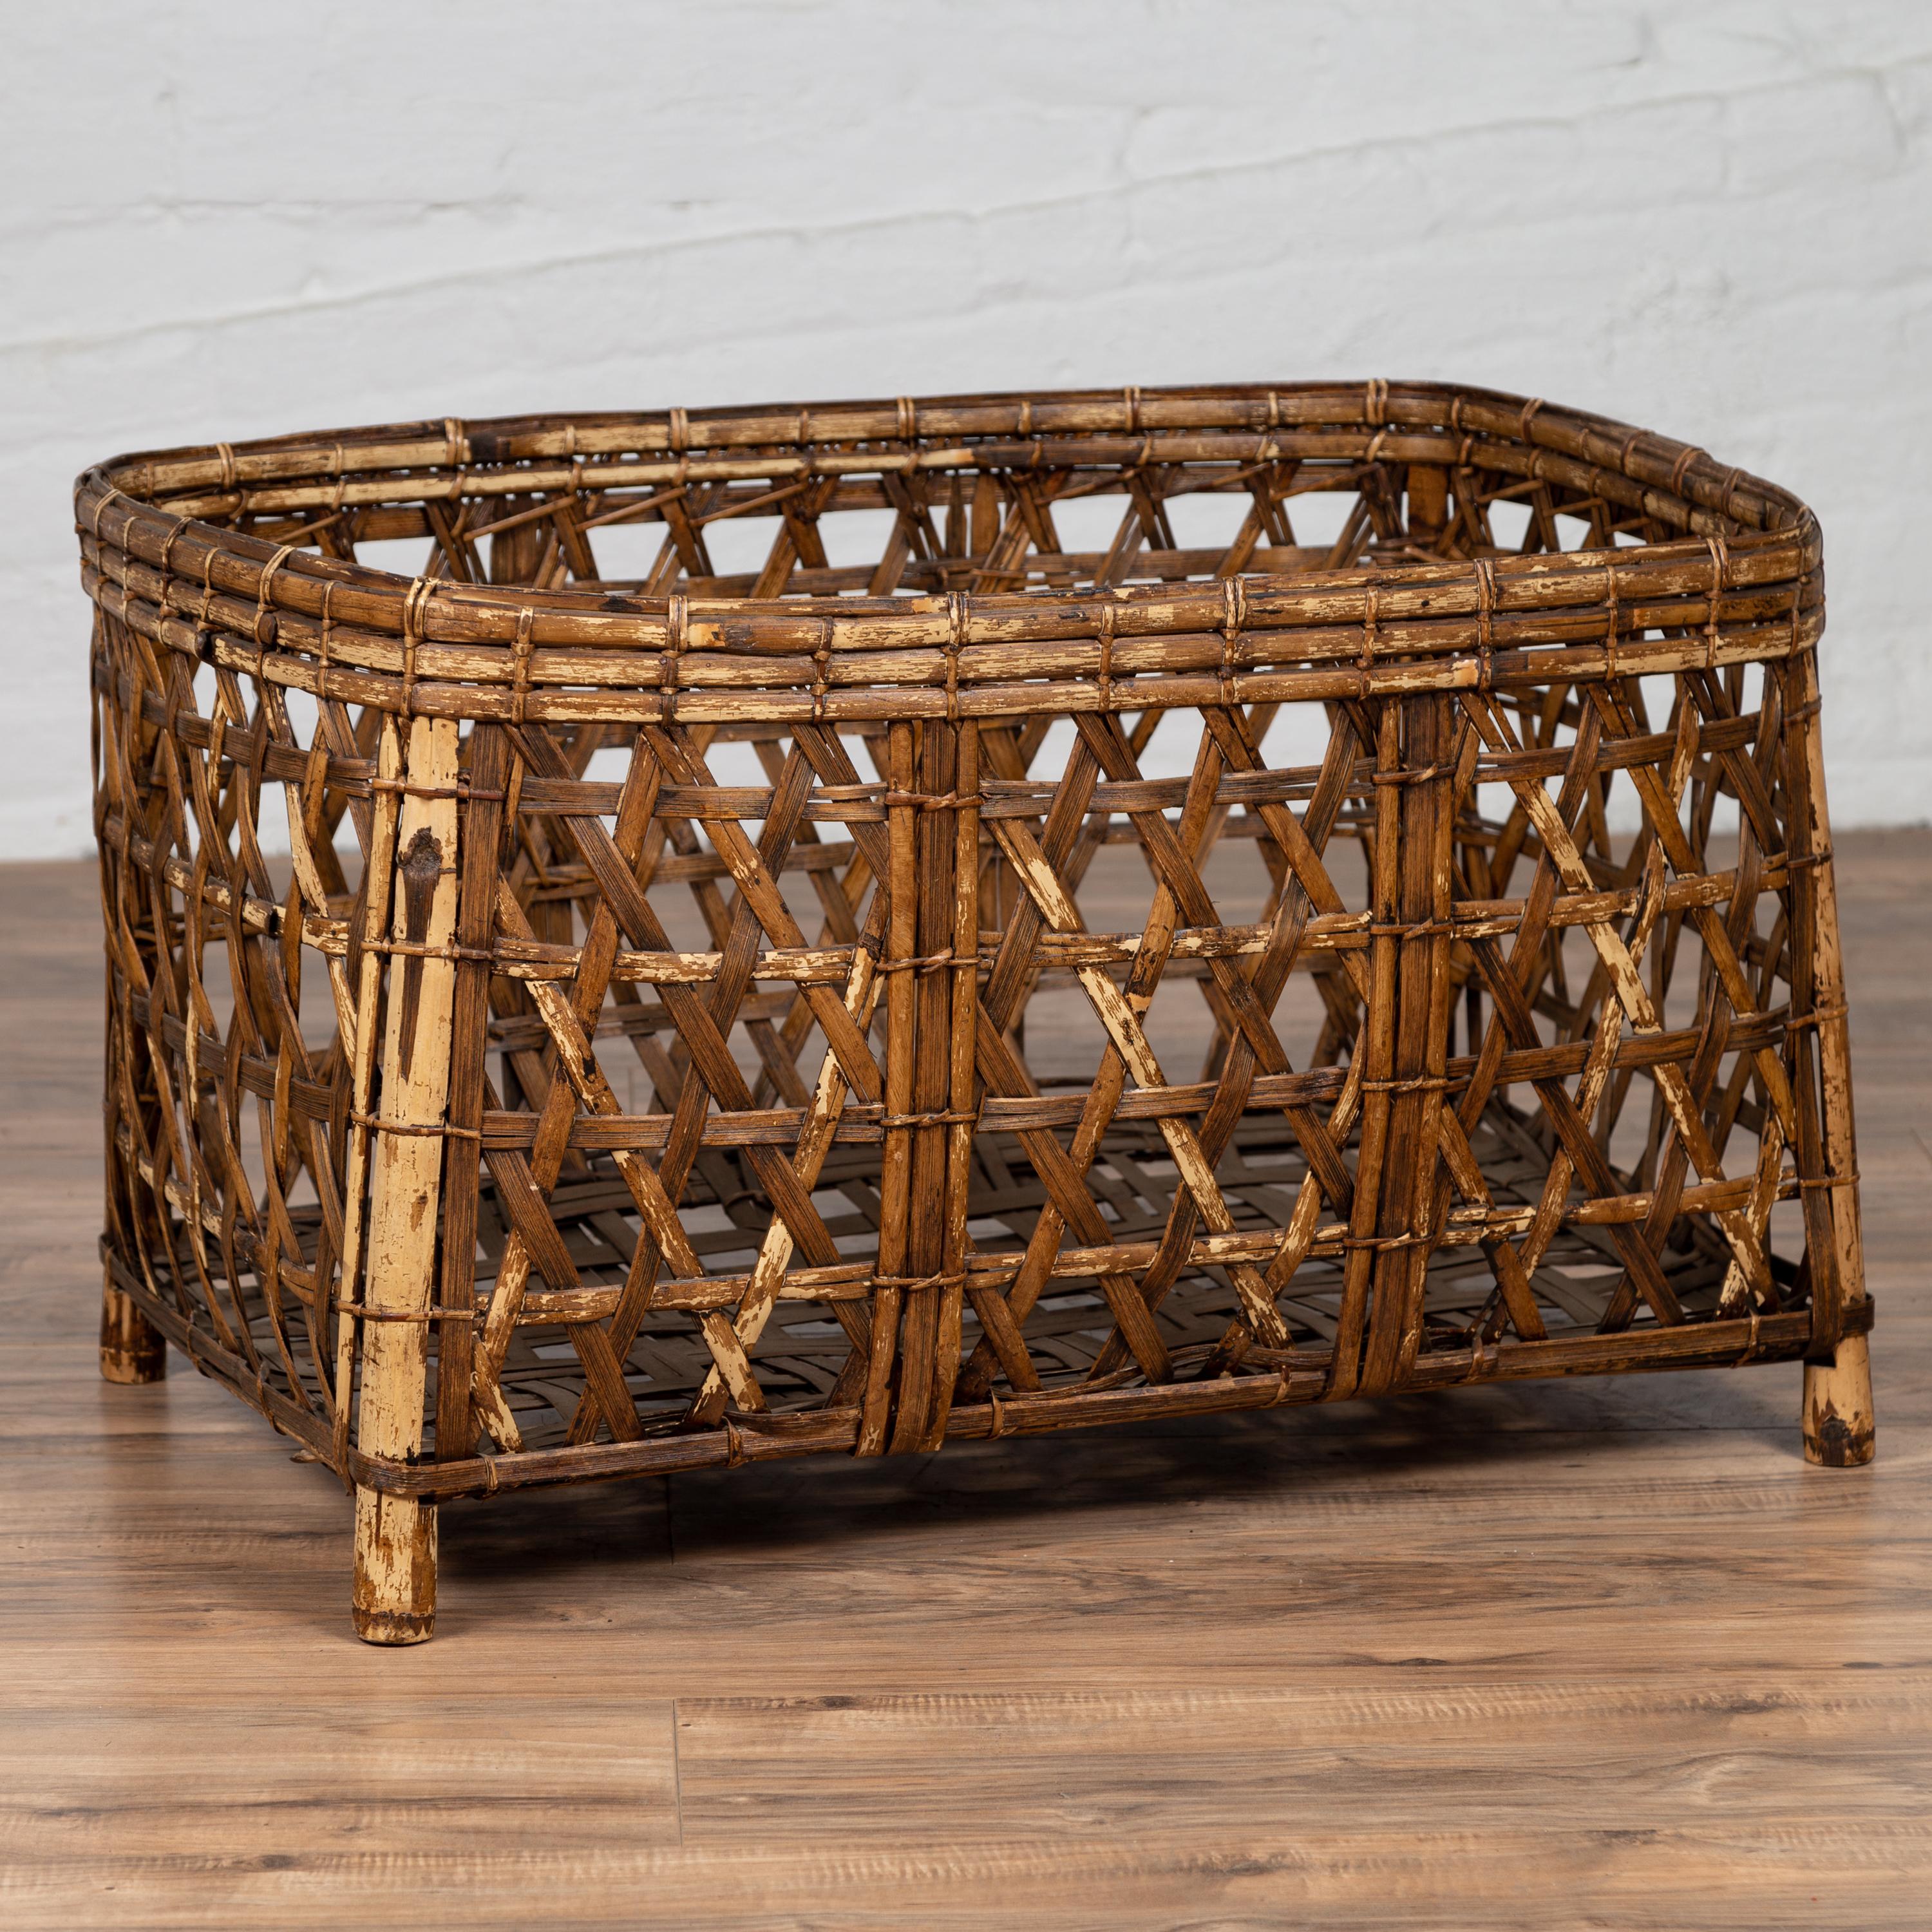 A large vintage bamboo fretwork basket from the mid-20th century, raised on short feet. This large vintage bamboo fretwork basket from the mid-20th century, raised on short feet, is a superb example of mid-century craftsmanship. Hand-crafted and